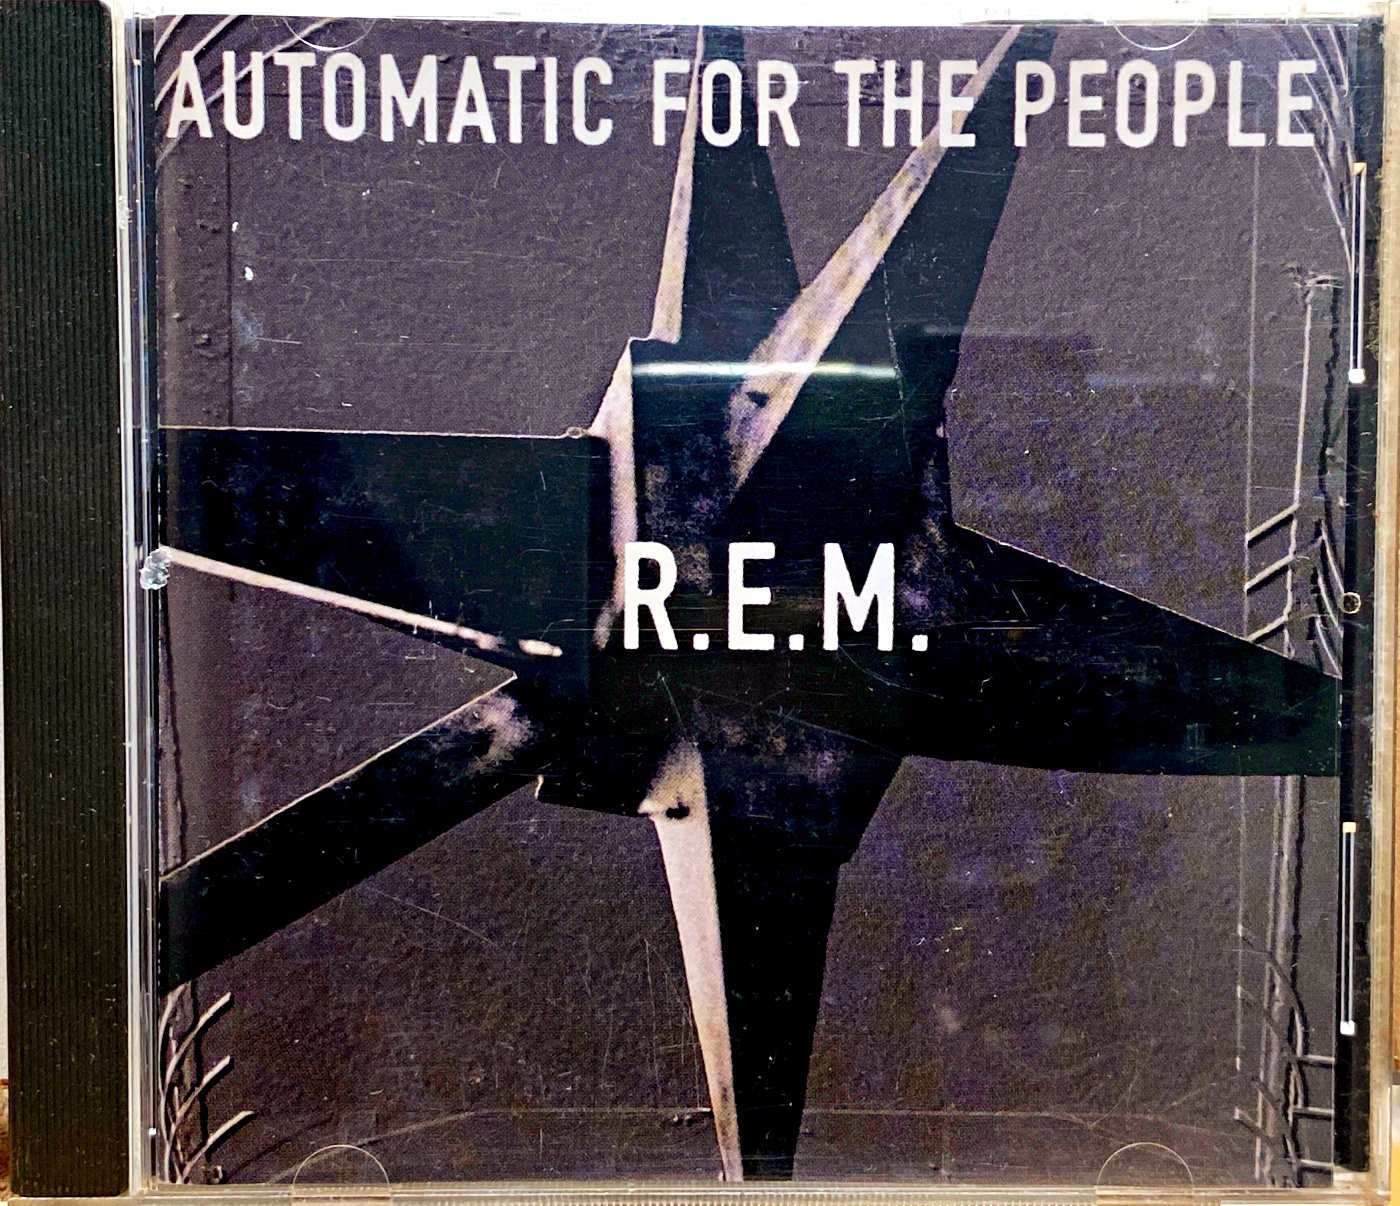 CD R.E.M. – Automatic For The People